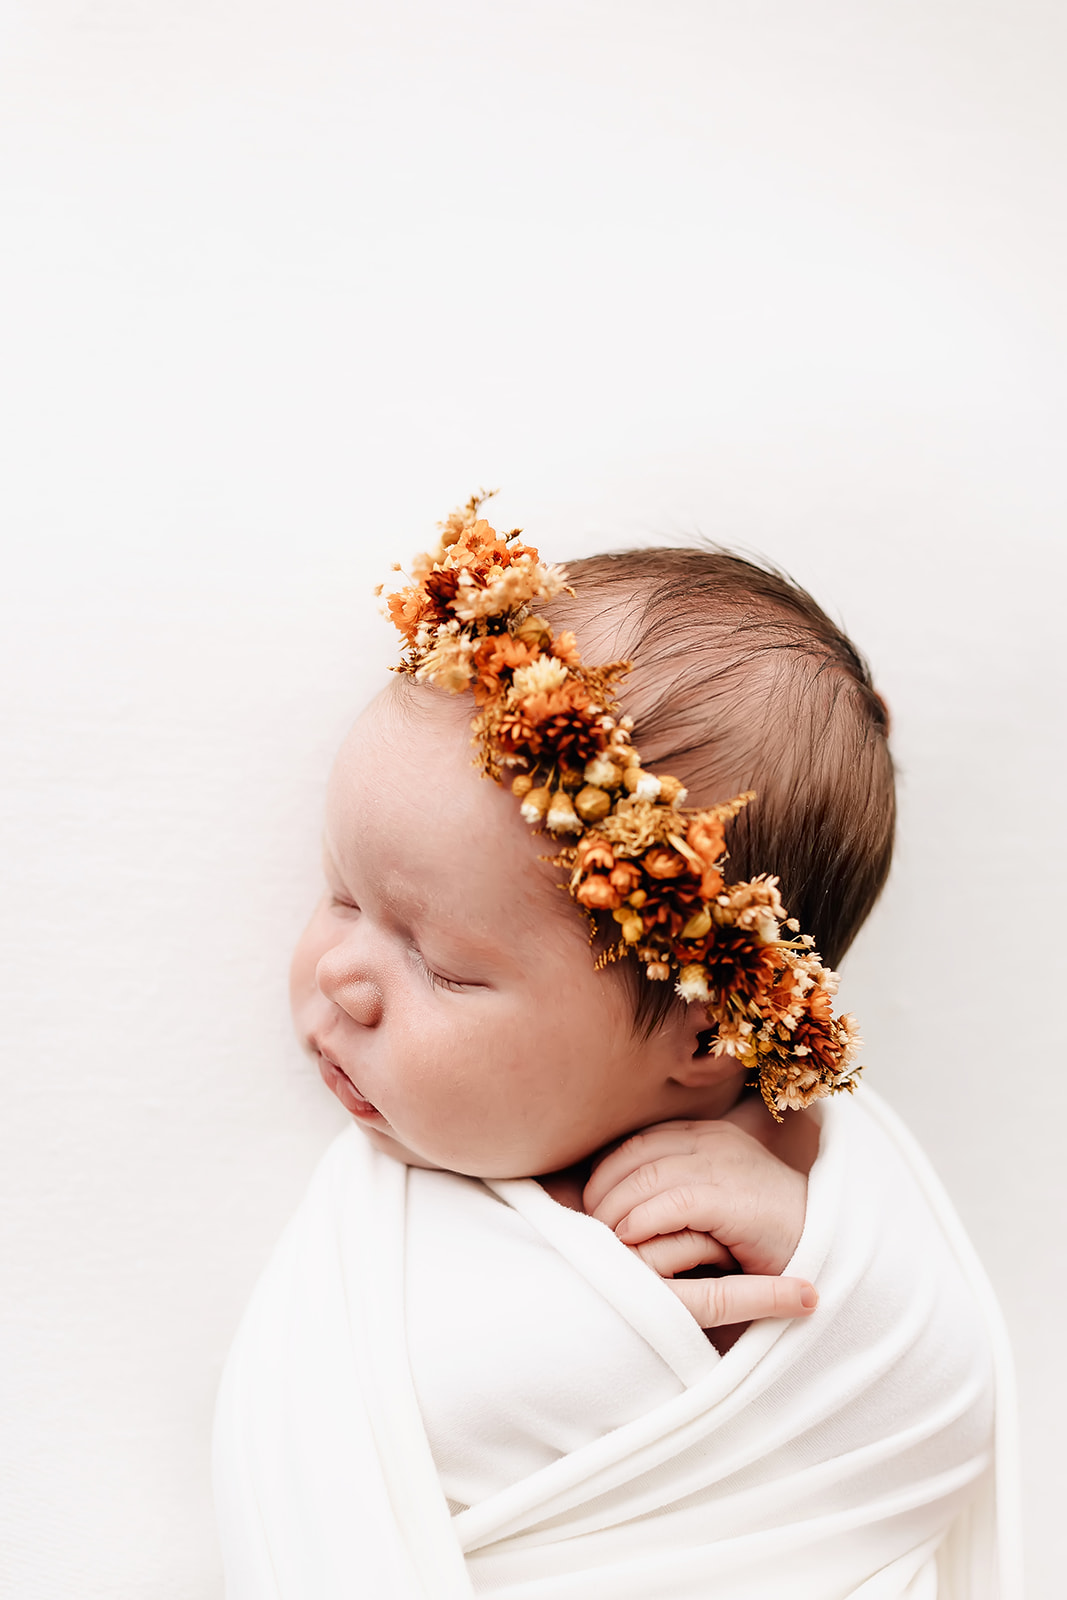 A newborn baby sleeps in a fall colored floral headband daycare st louis